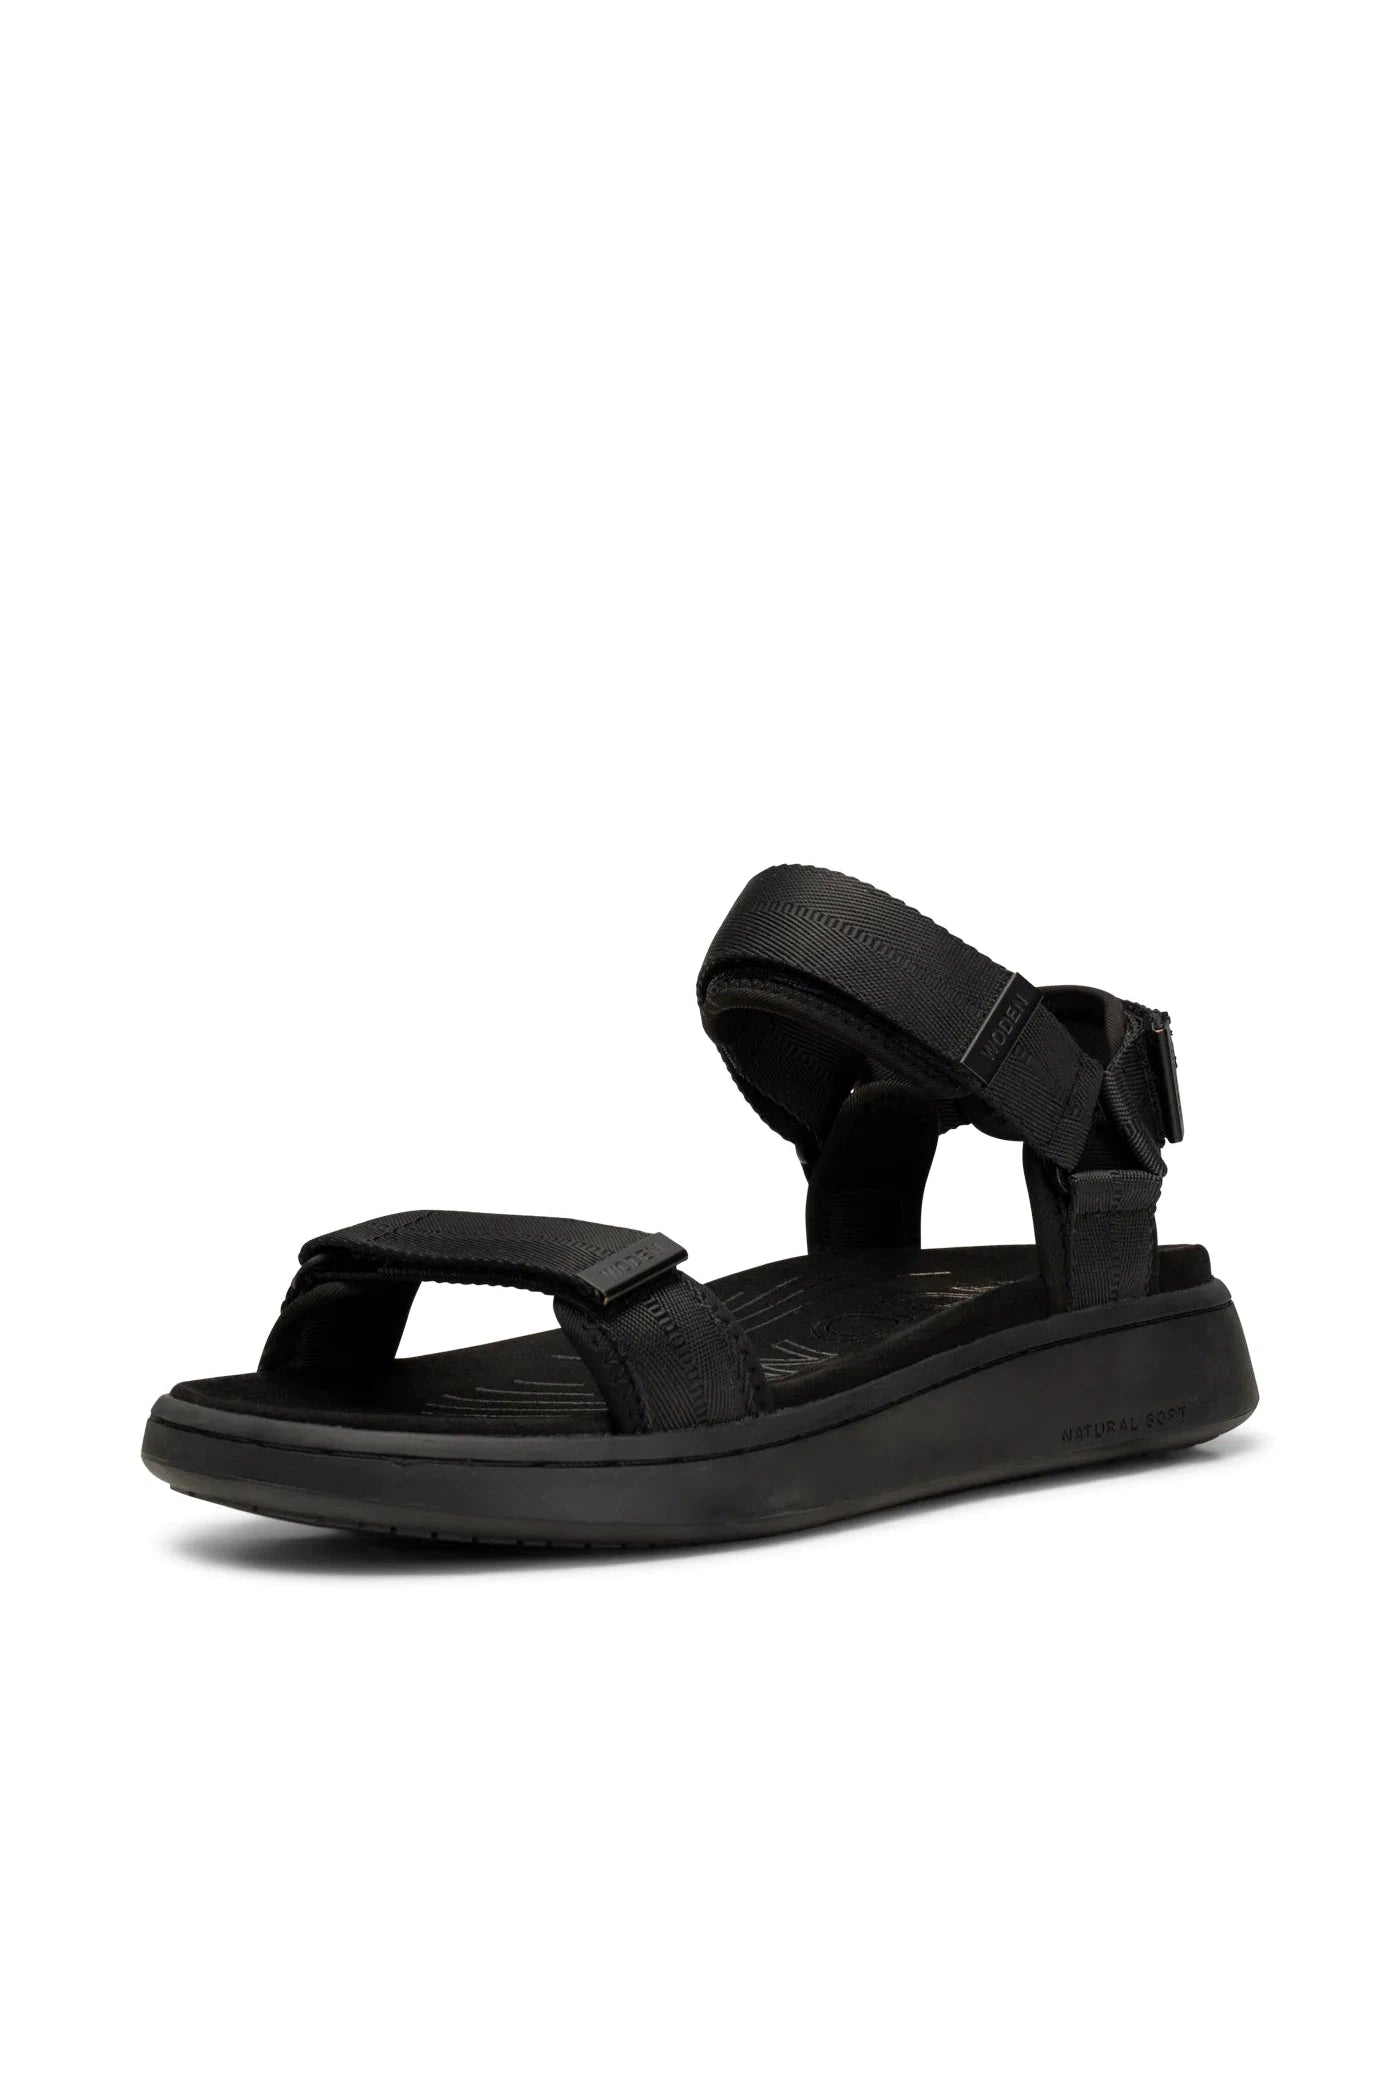 Woden Sandals - Black/Black-Accessories-Ohh! By Gum - Shop Sustainable